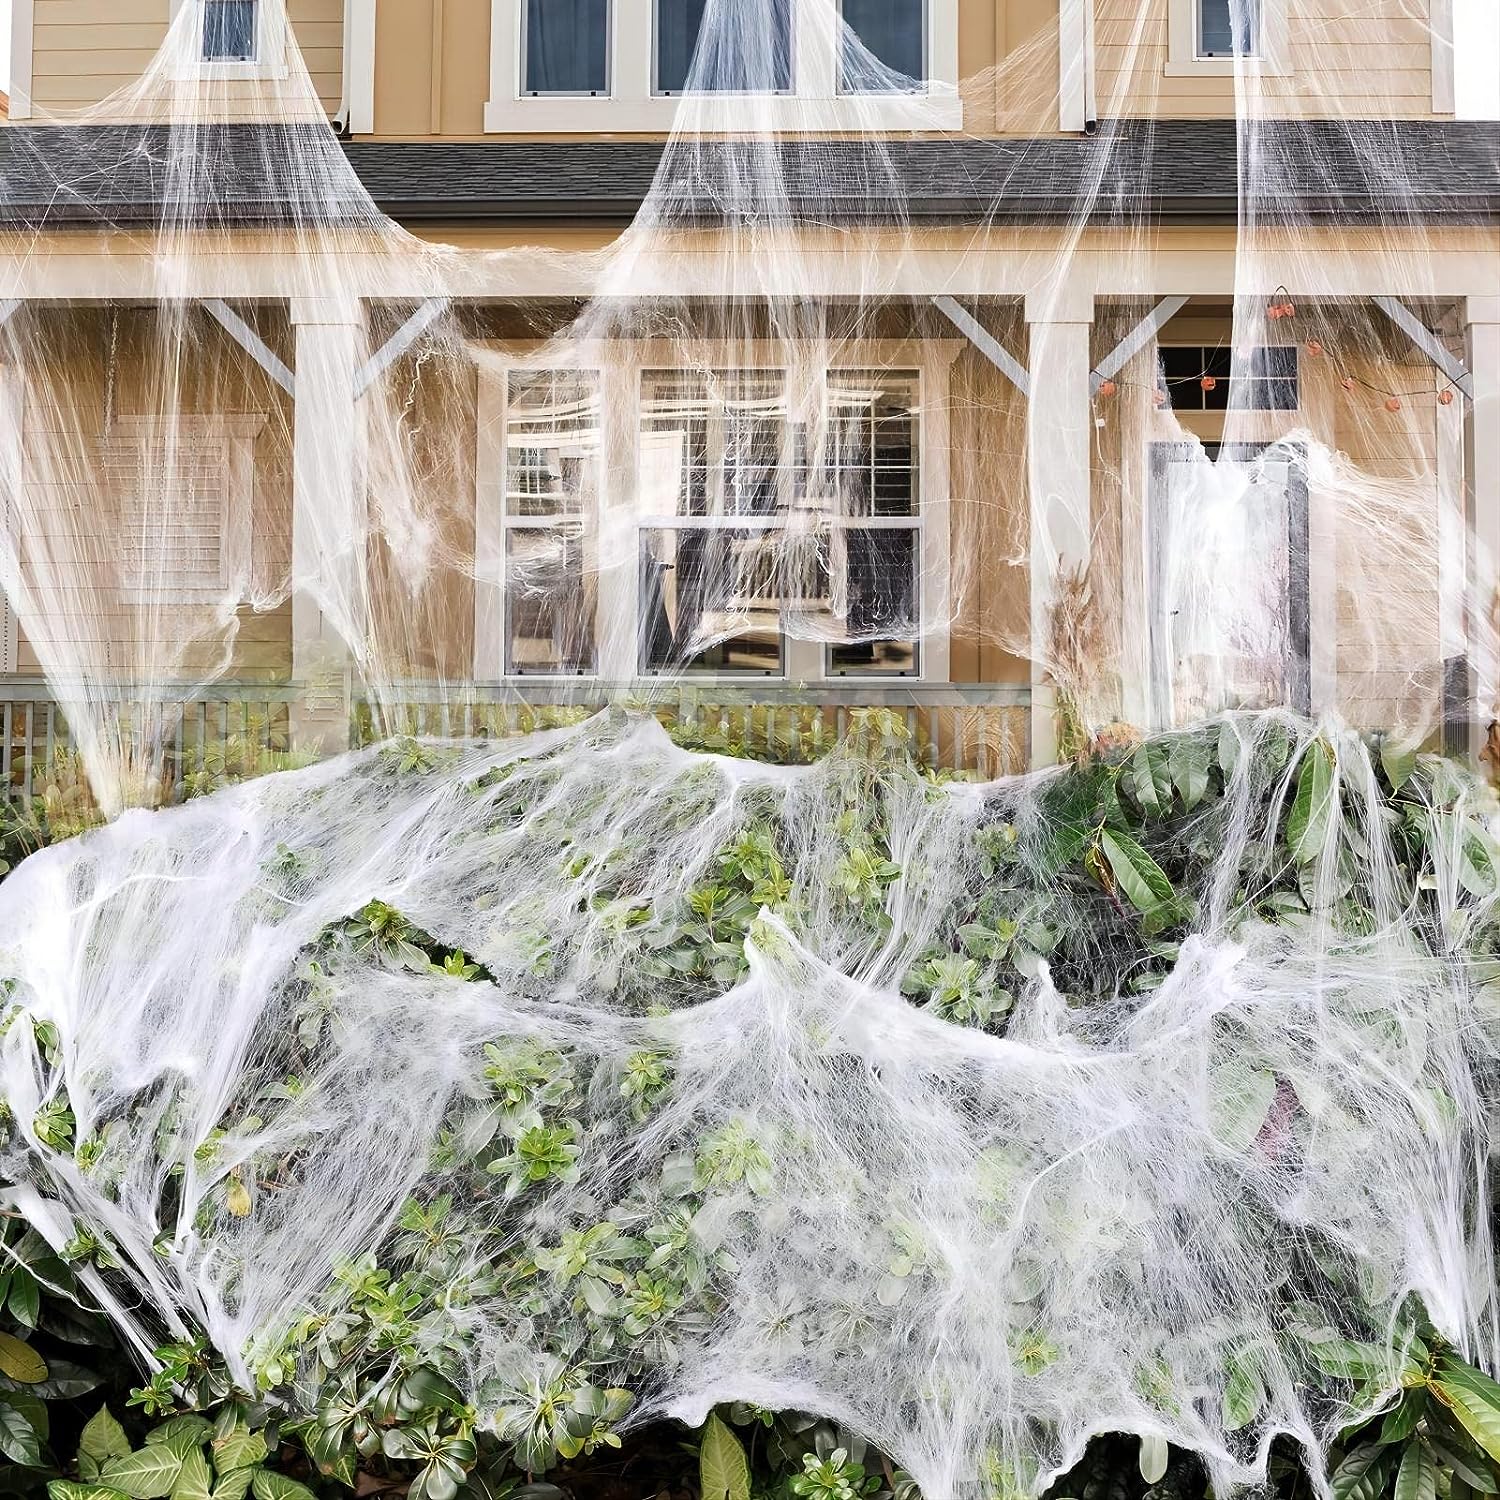 The Best Halloween Decorations: Stretchy Spiderwebs for the Yard